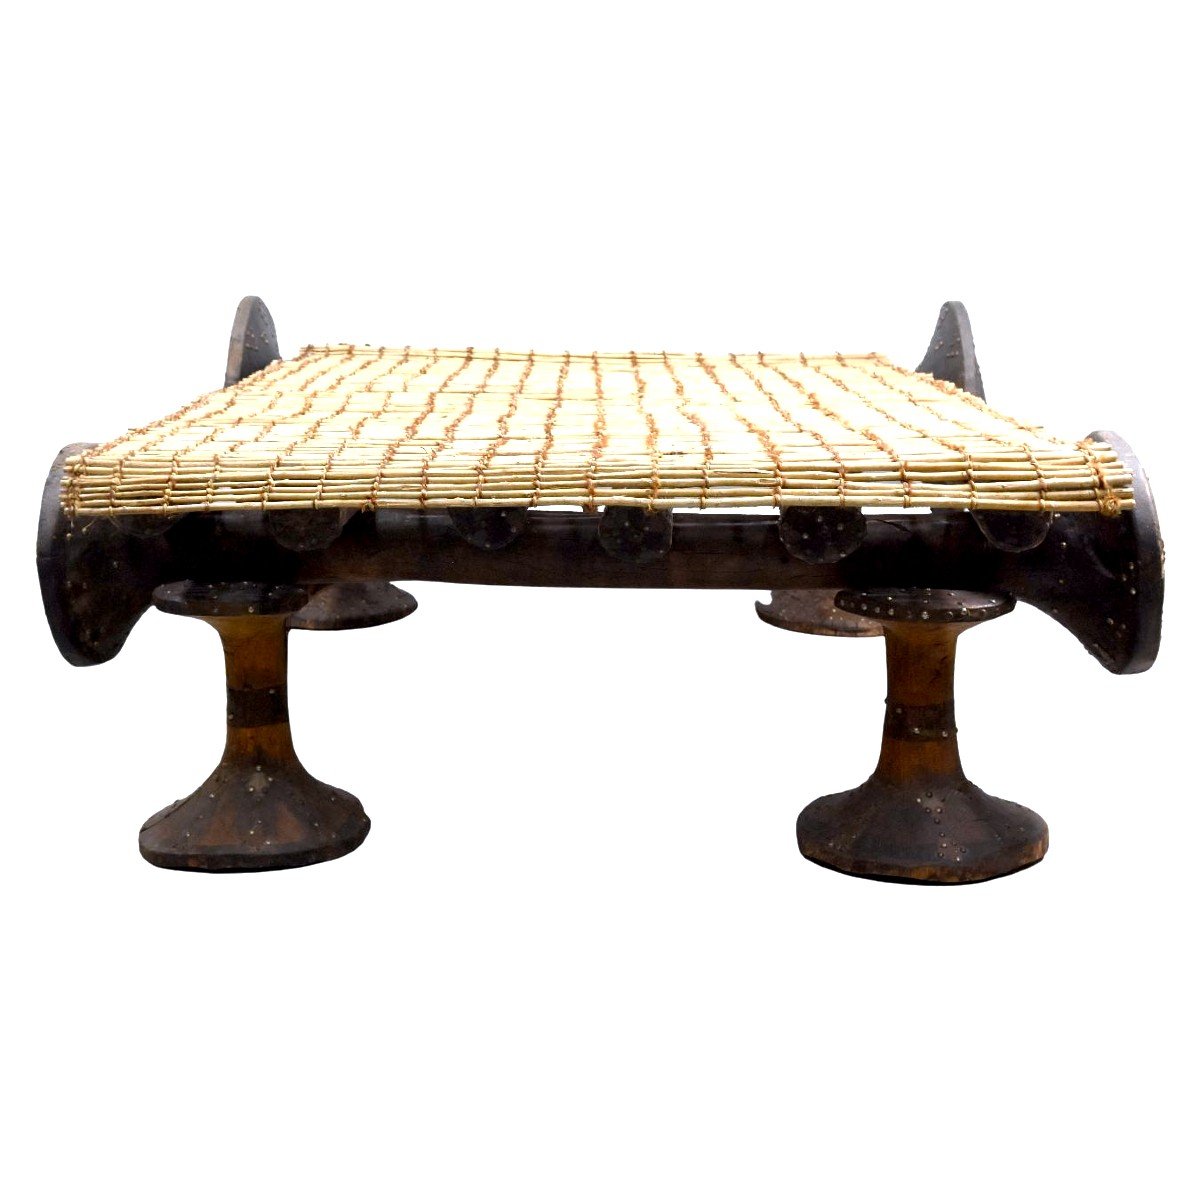 Tuareg Bed From The First Half Of The 20th Century-photo-2